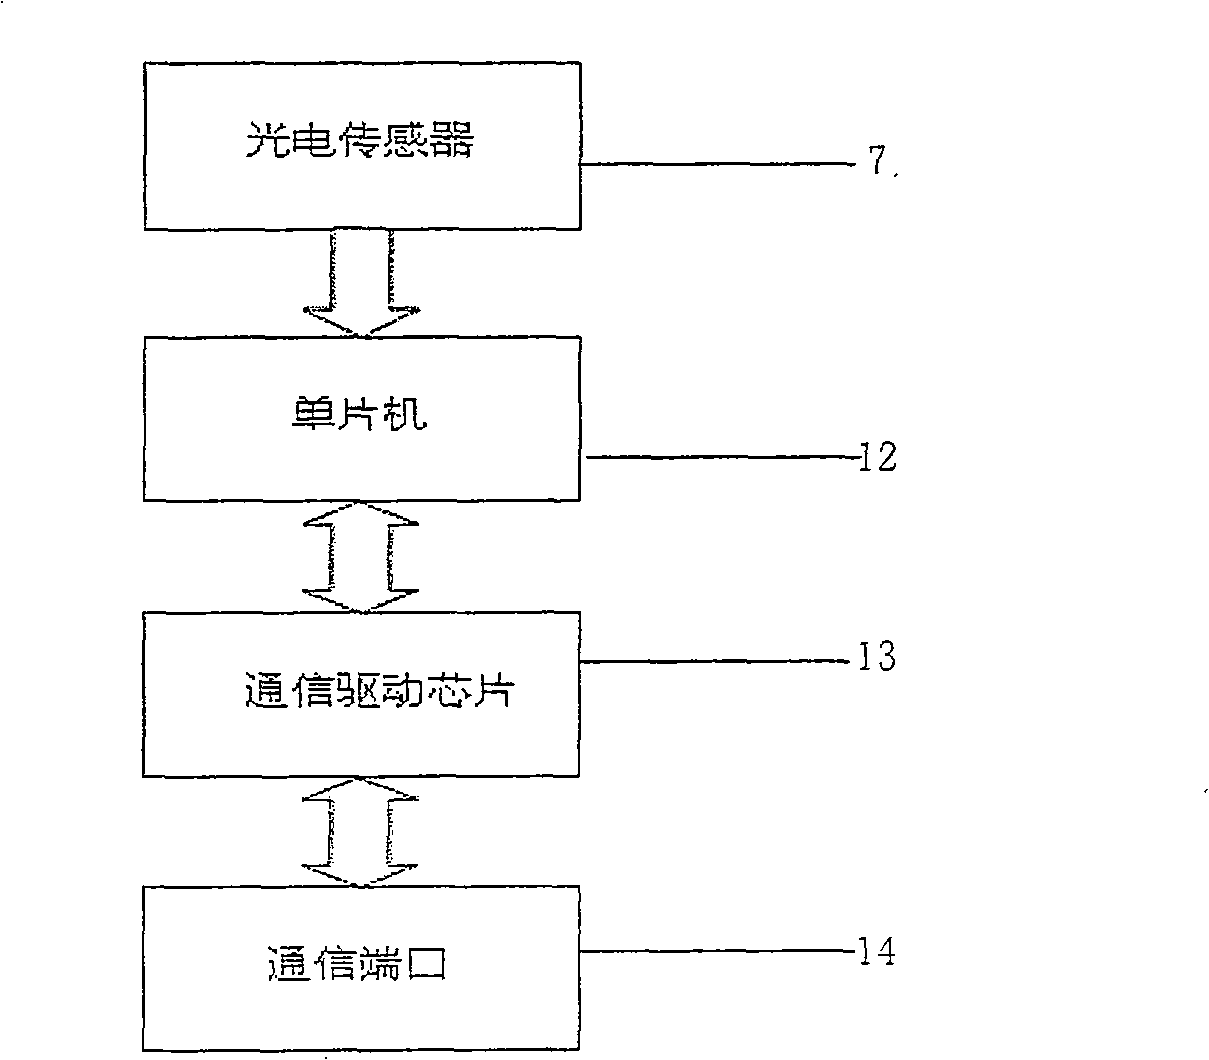 Pose sensing system and method for mobile robot